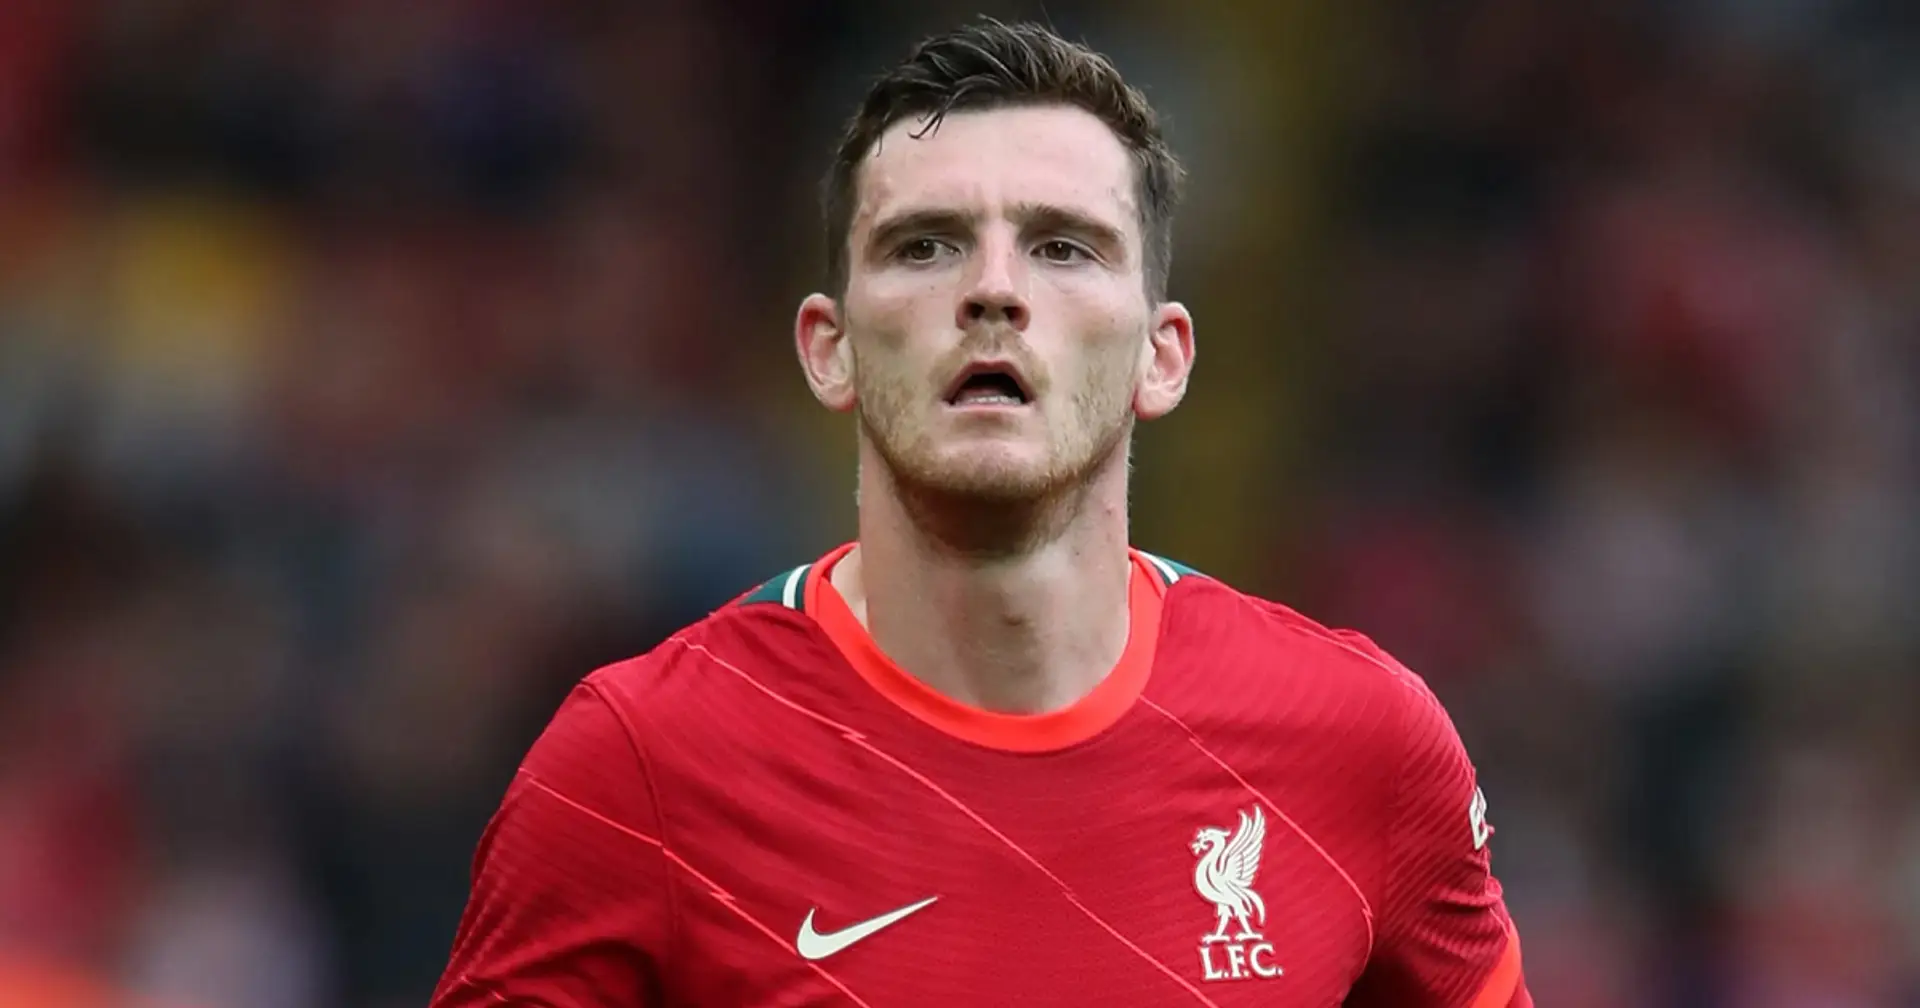 Robertson back in training & 3 more big stories at Liverpool you might've missed